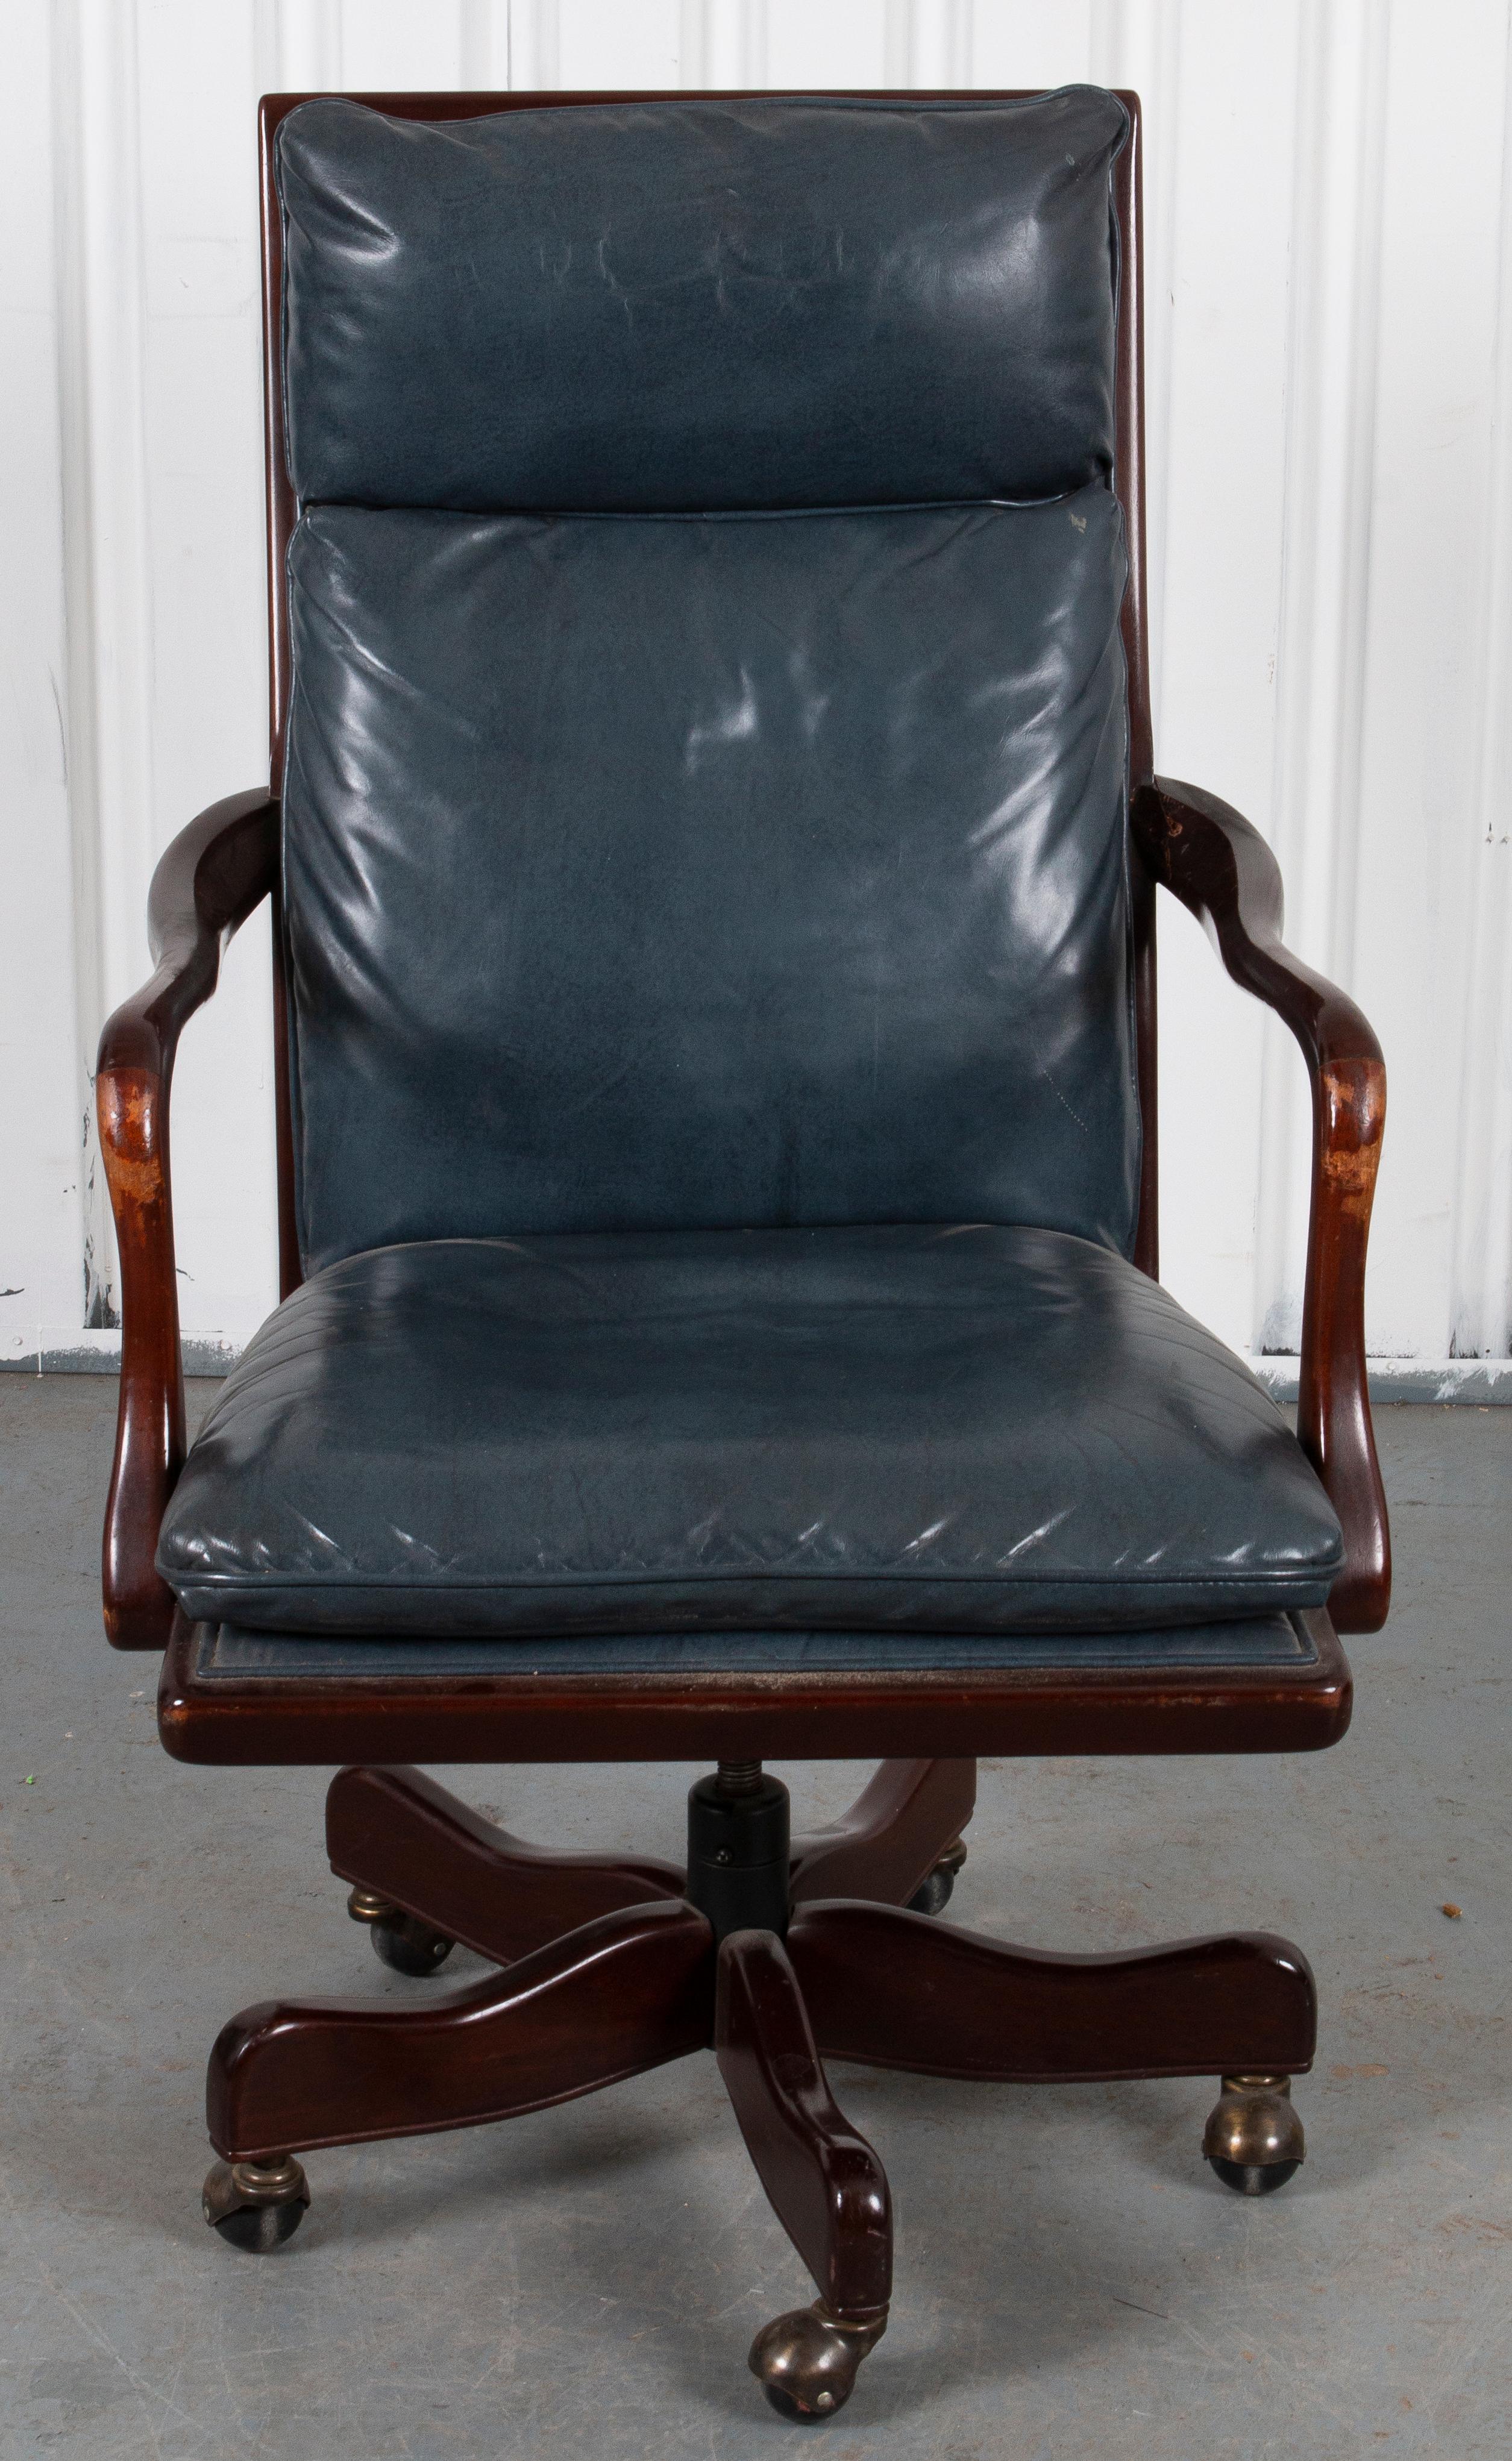 Armchair with wood frame over wheels, upholstered in blue leather.